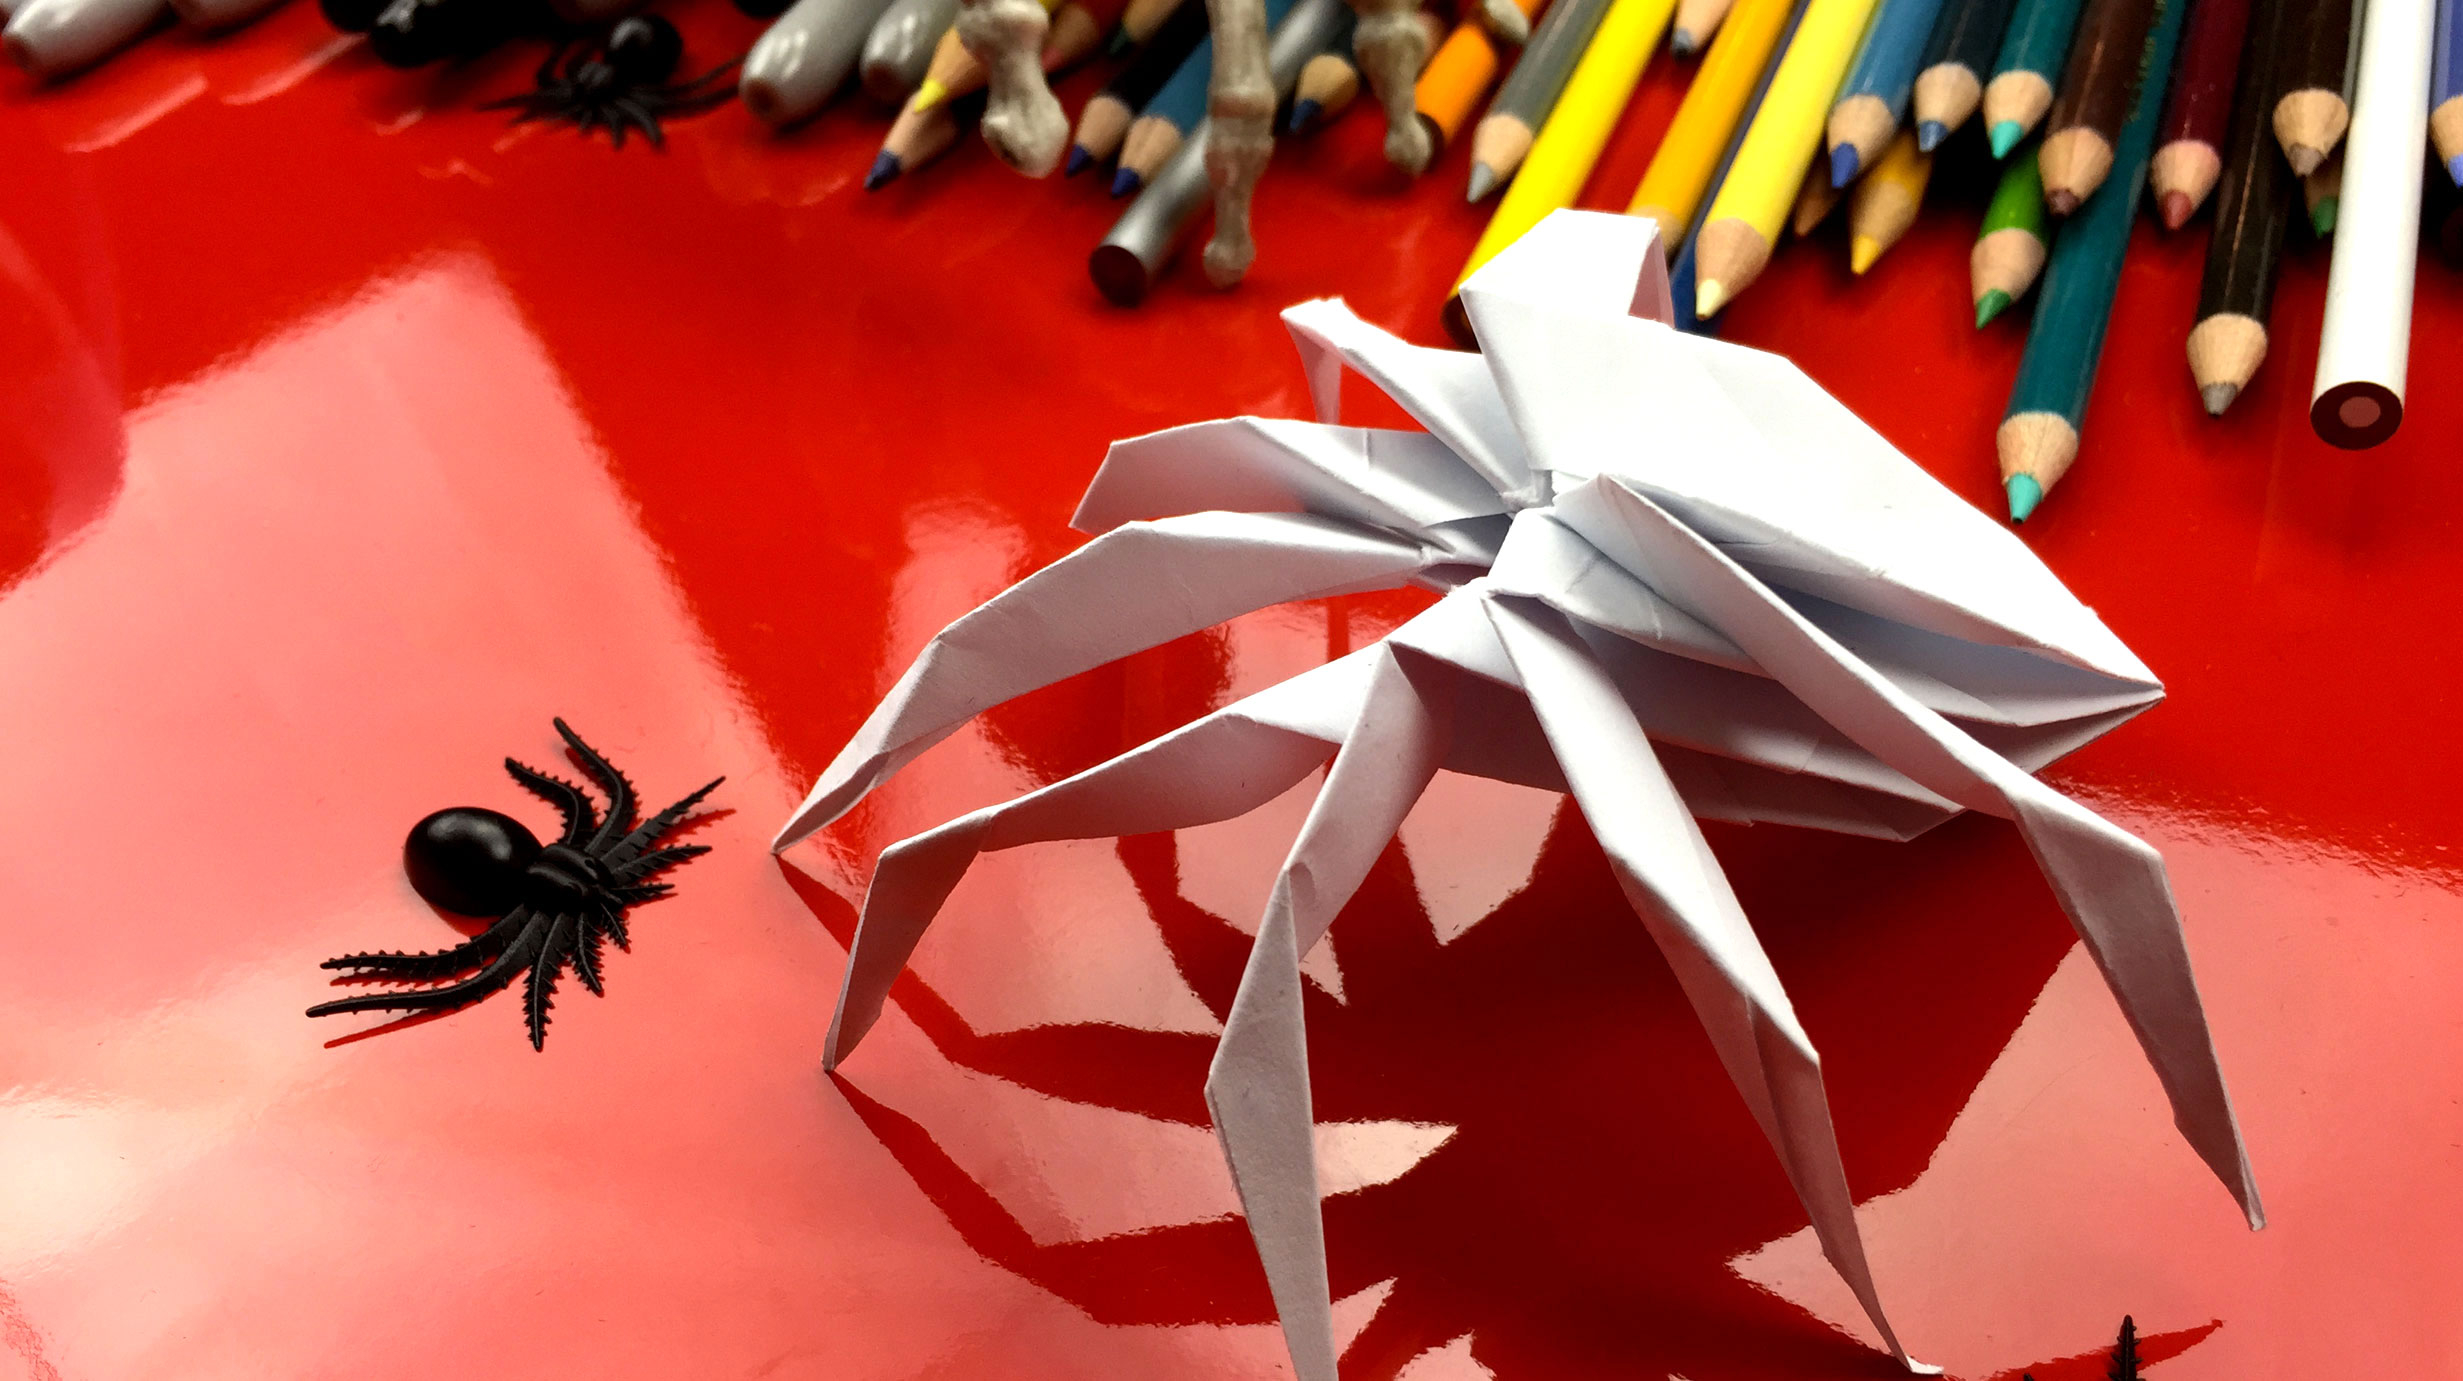 How To Make An Origami Spider How To Fold An Origami Spider Art For Kids Hub